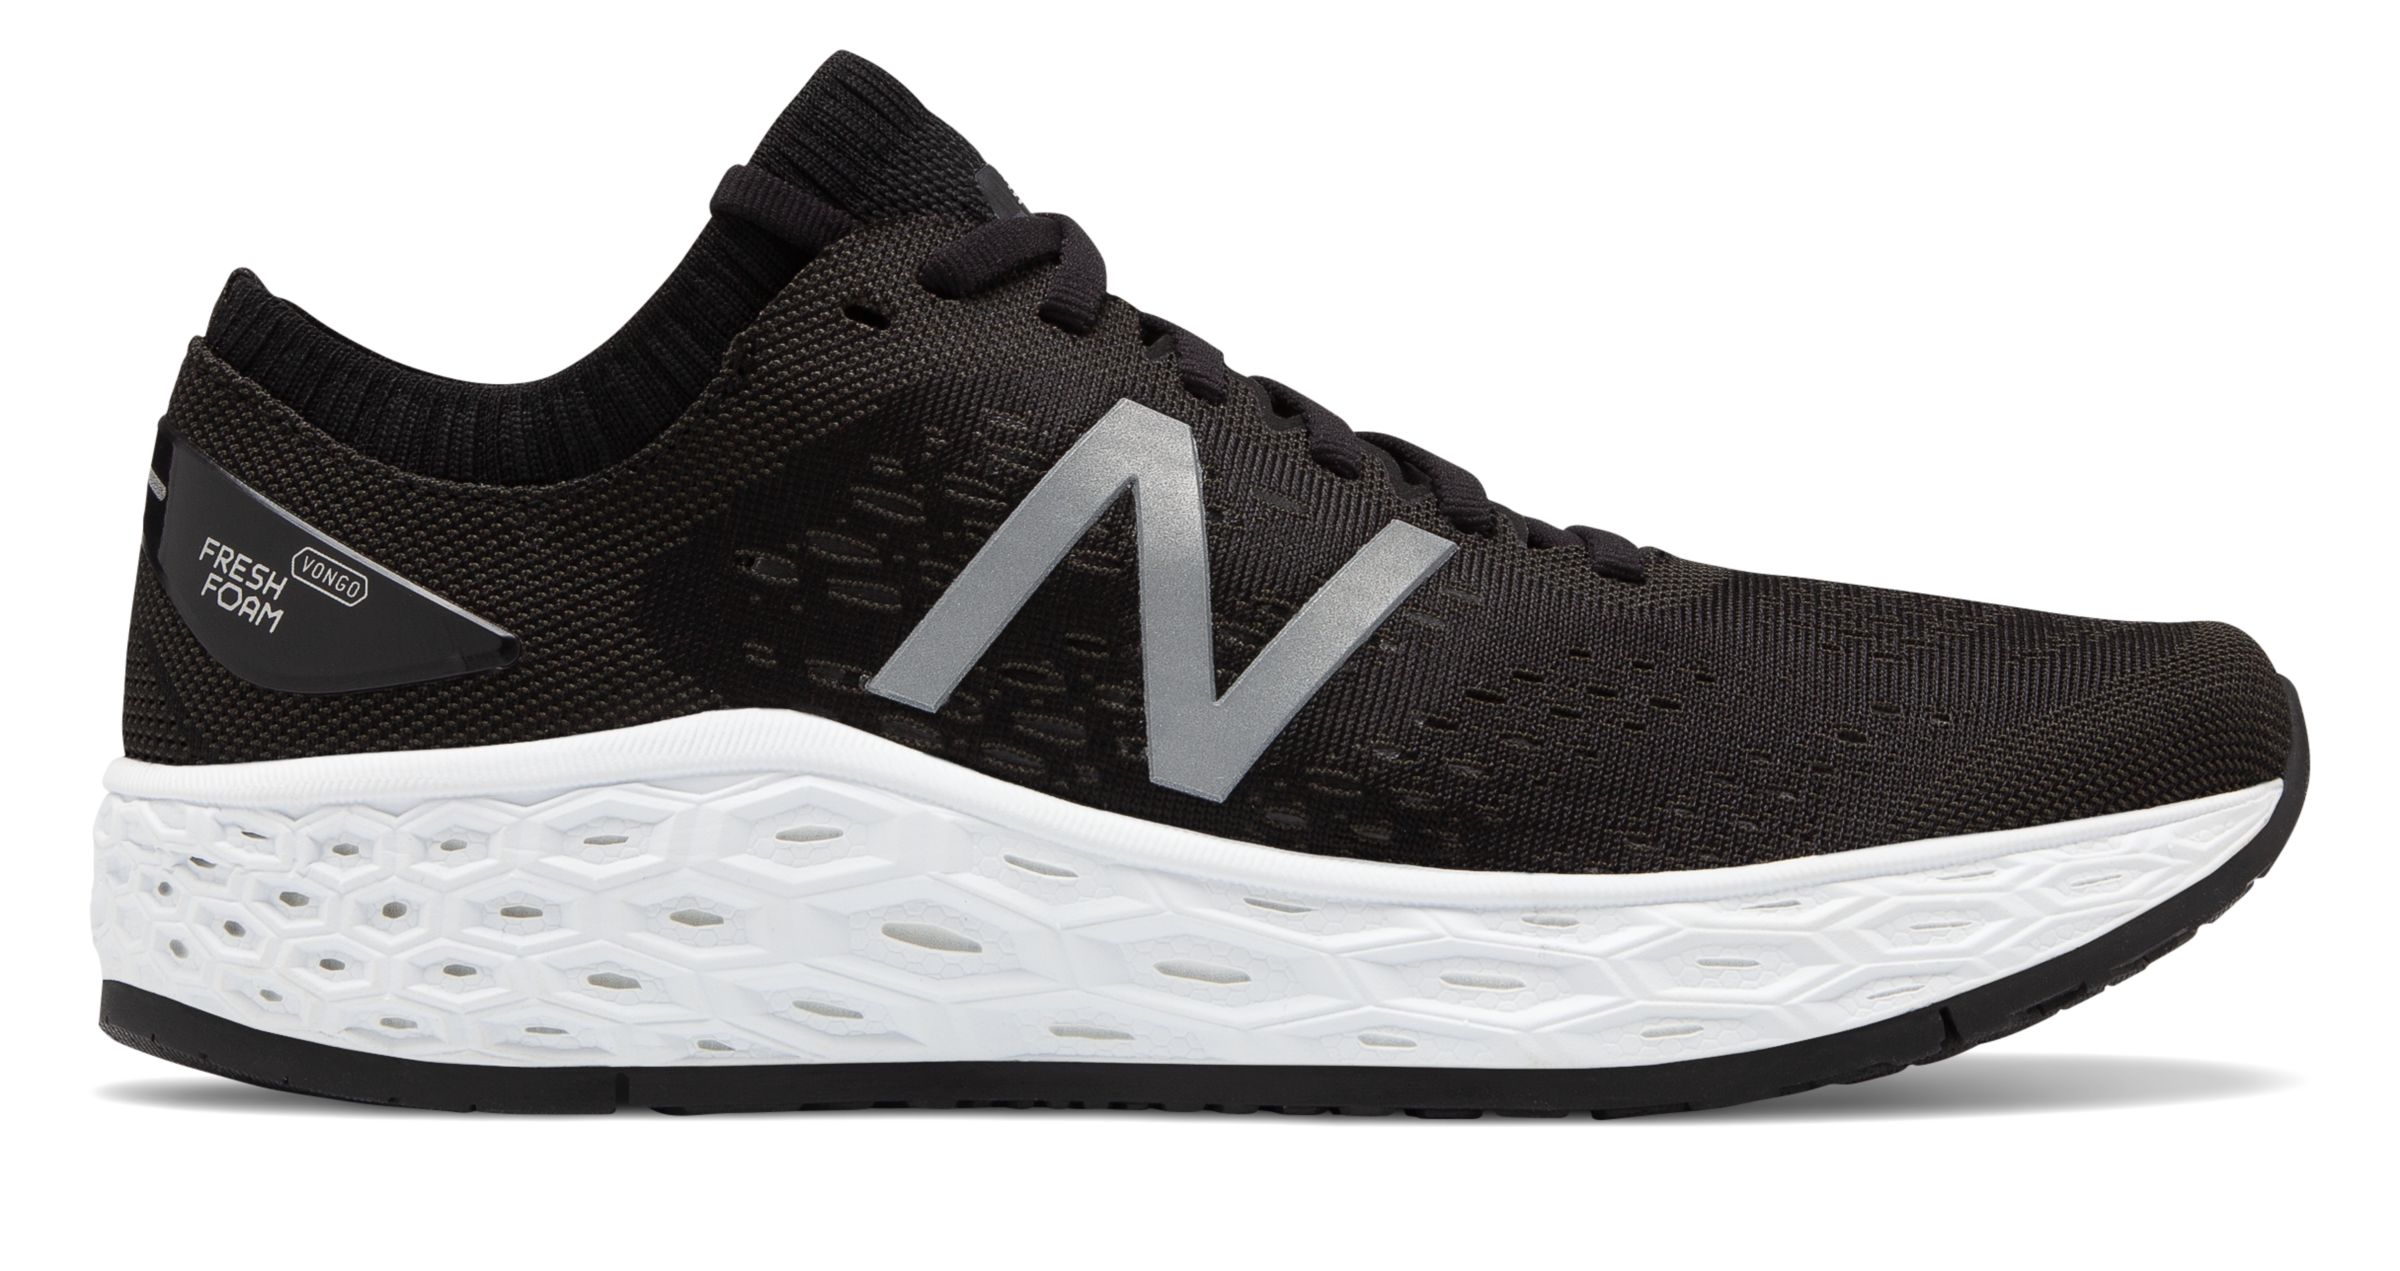 black new balance shoes for women